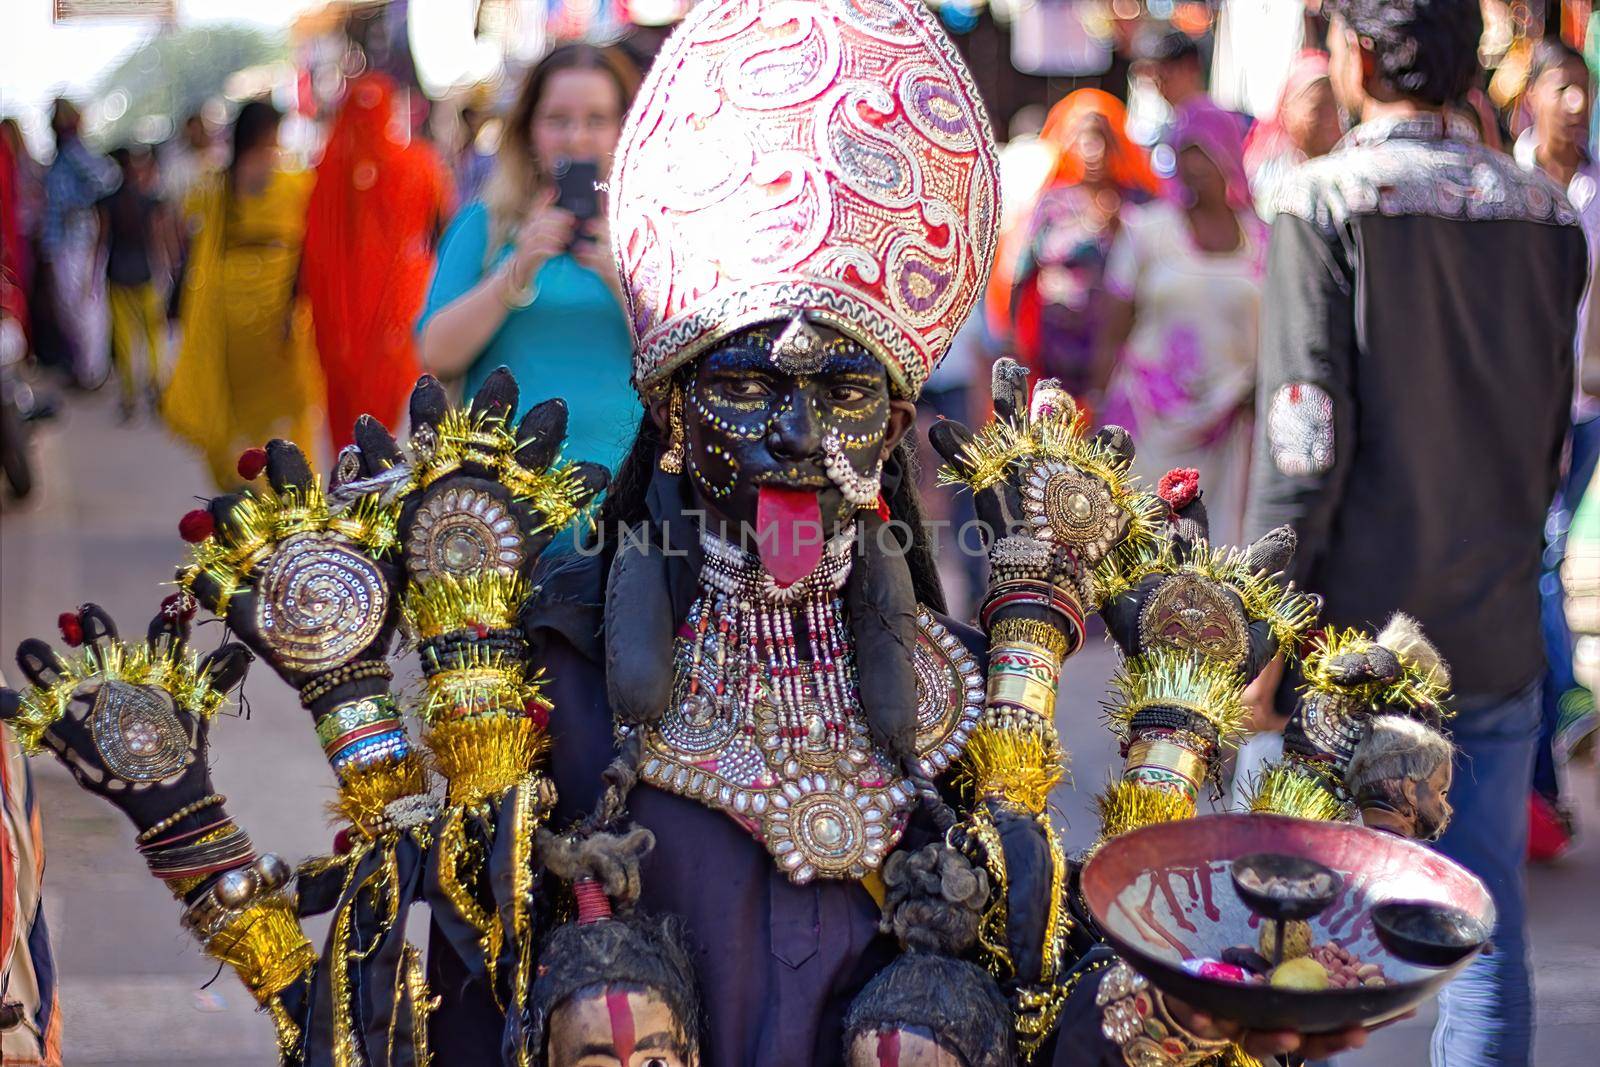 Pushkar, India - November 10, 2016: A young little girl dressed up or disguised as Indian goddess of destruction named maa Kali with crown and multiple hands as street performer during Pushkar fair